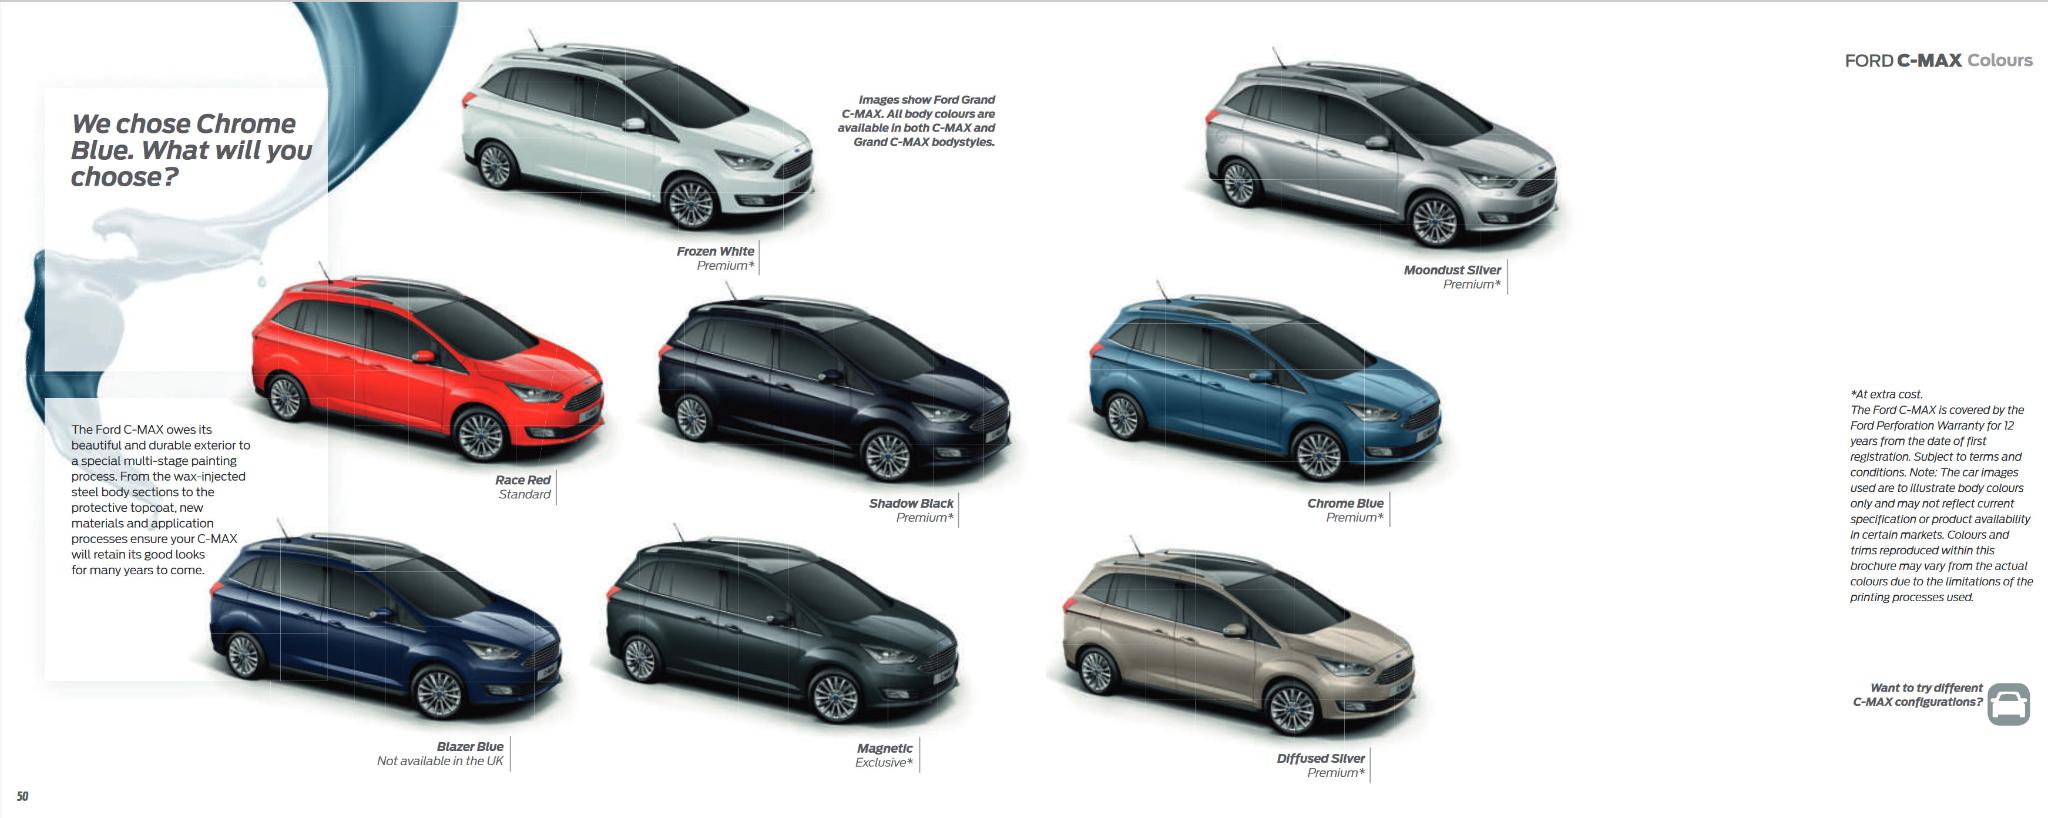 A picture showing exterior and interior paint samples for the 2019 Ford C-max vehicles